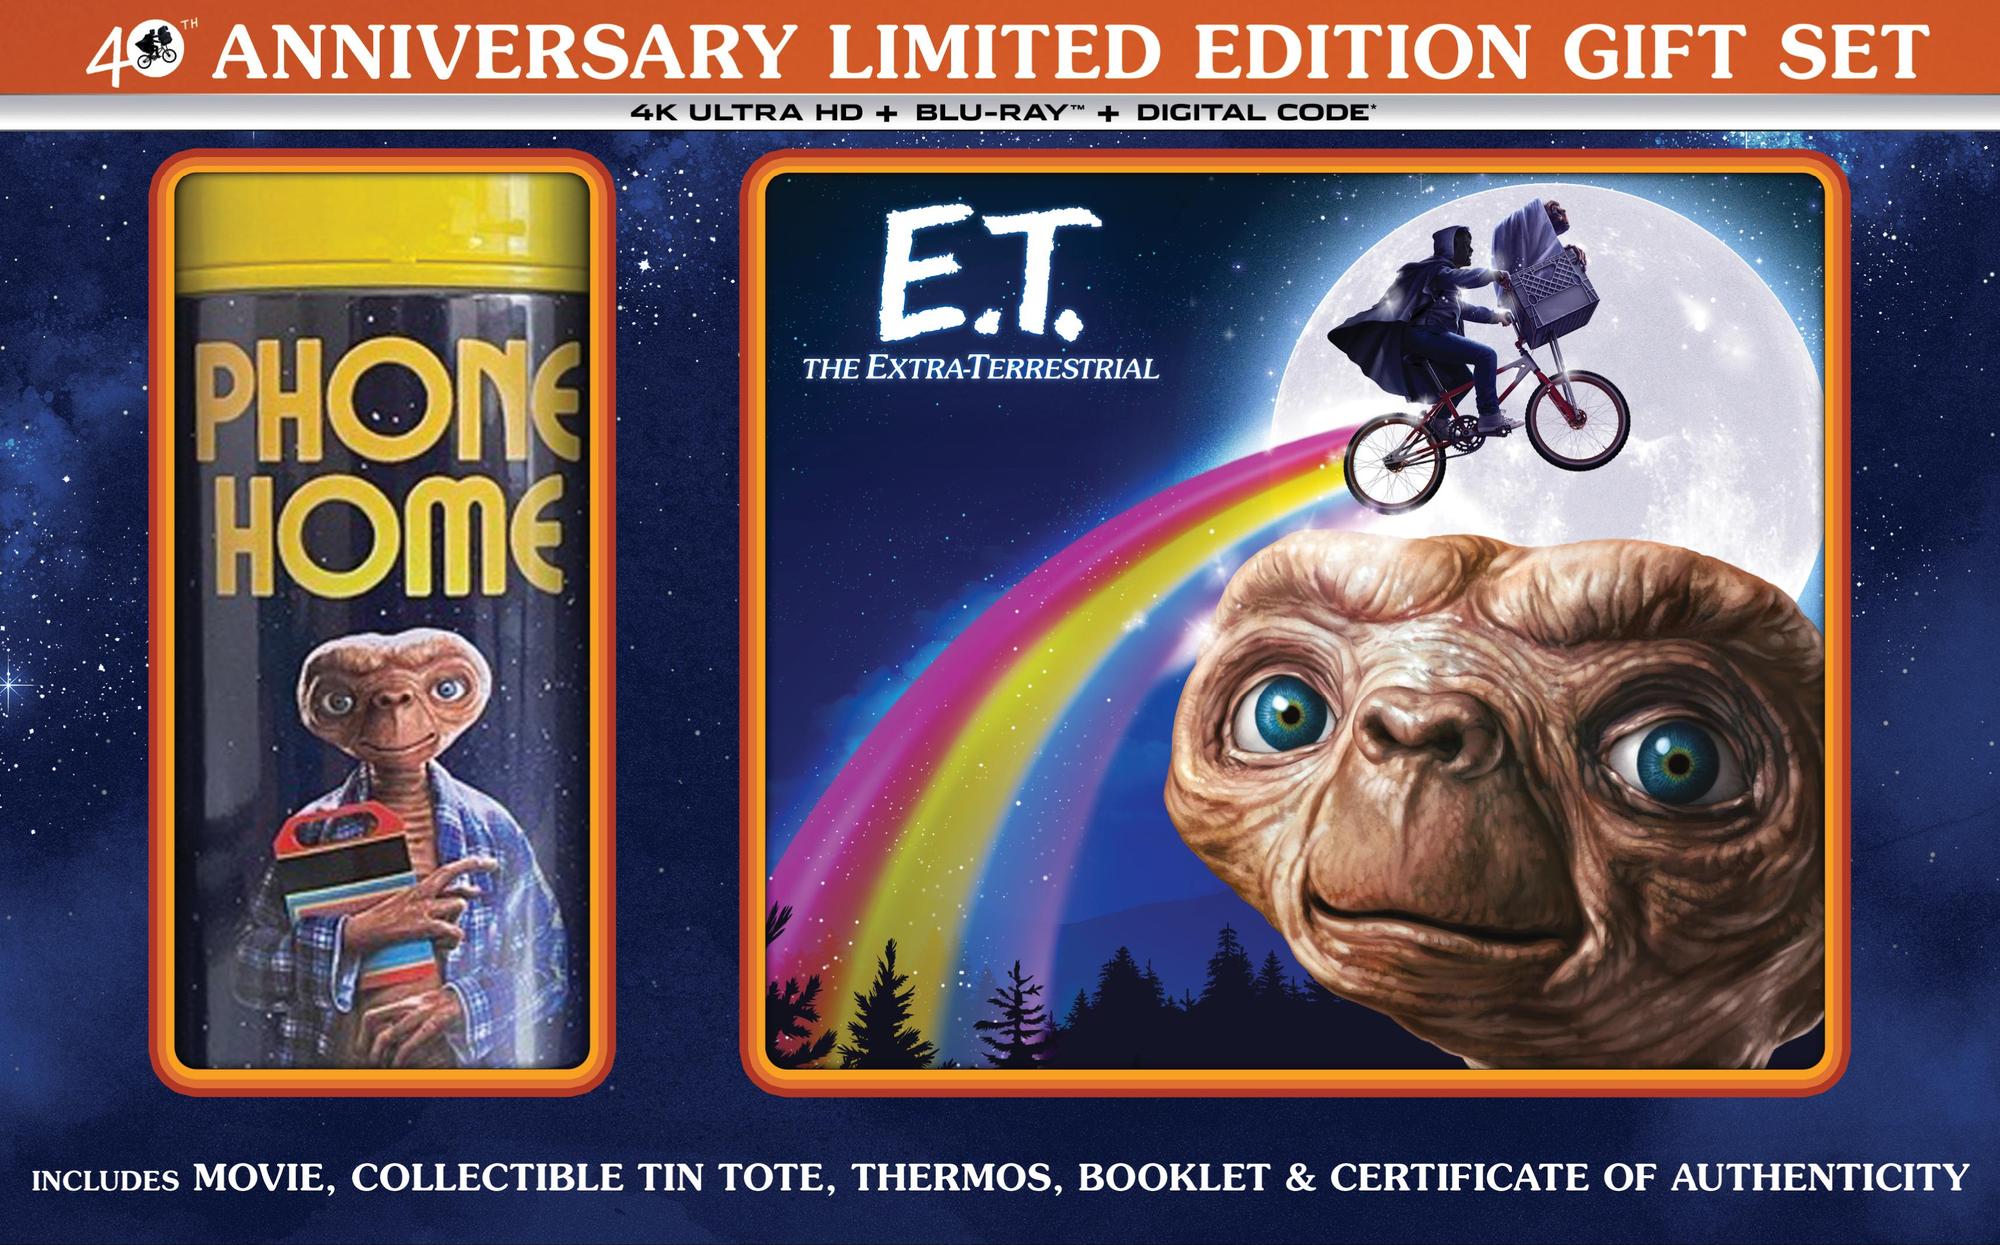 E.T. The Extra-Terrestrial - 40th Anniversary Limited Edition Gift Set (4K Ultra HD + Blu-ray) - UHD   - Sci Fi Movies On 4K Ultra HD Blu-ray - Movies